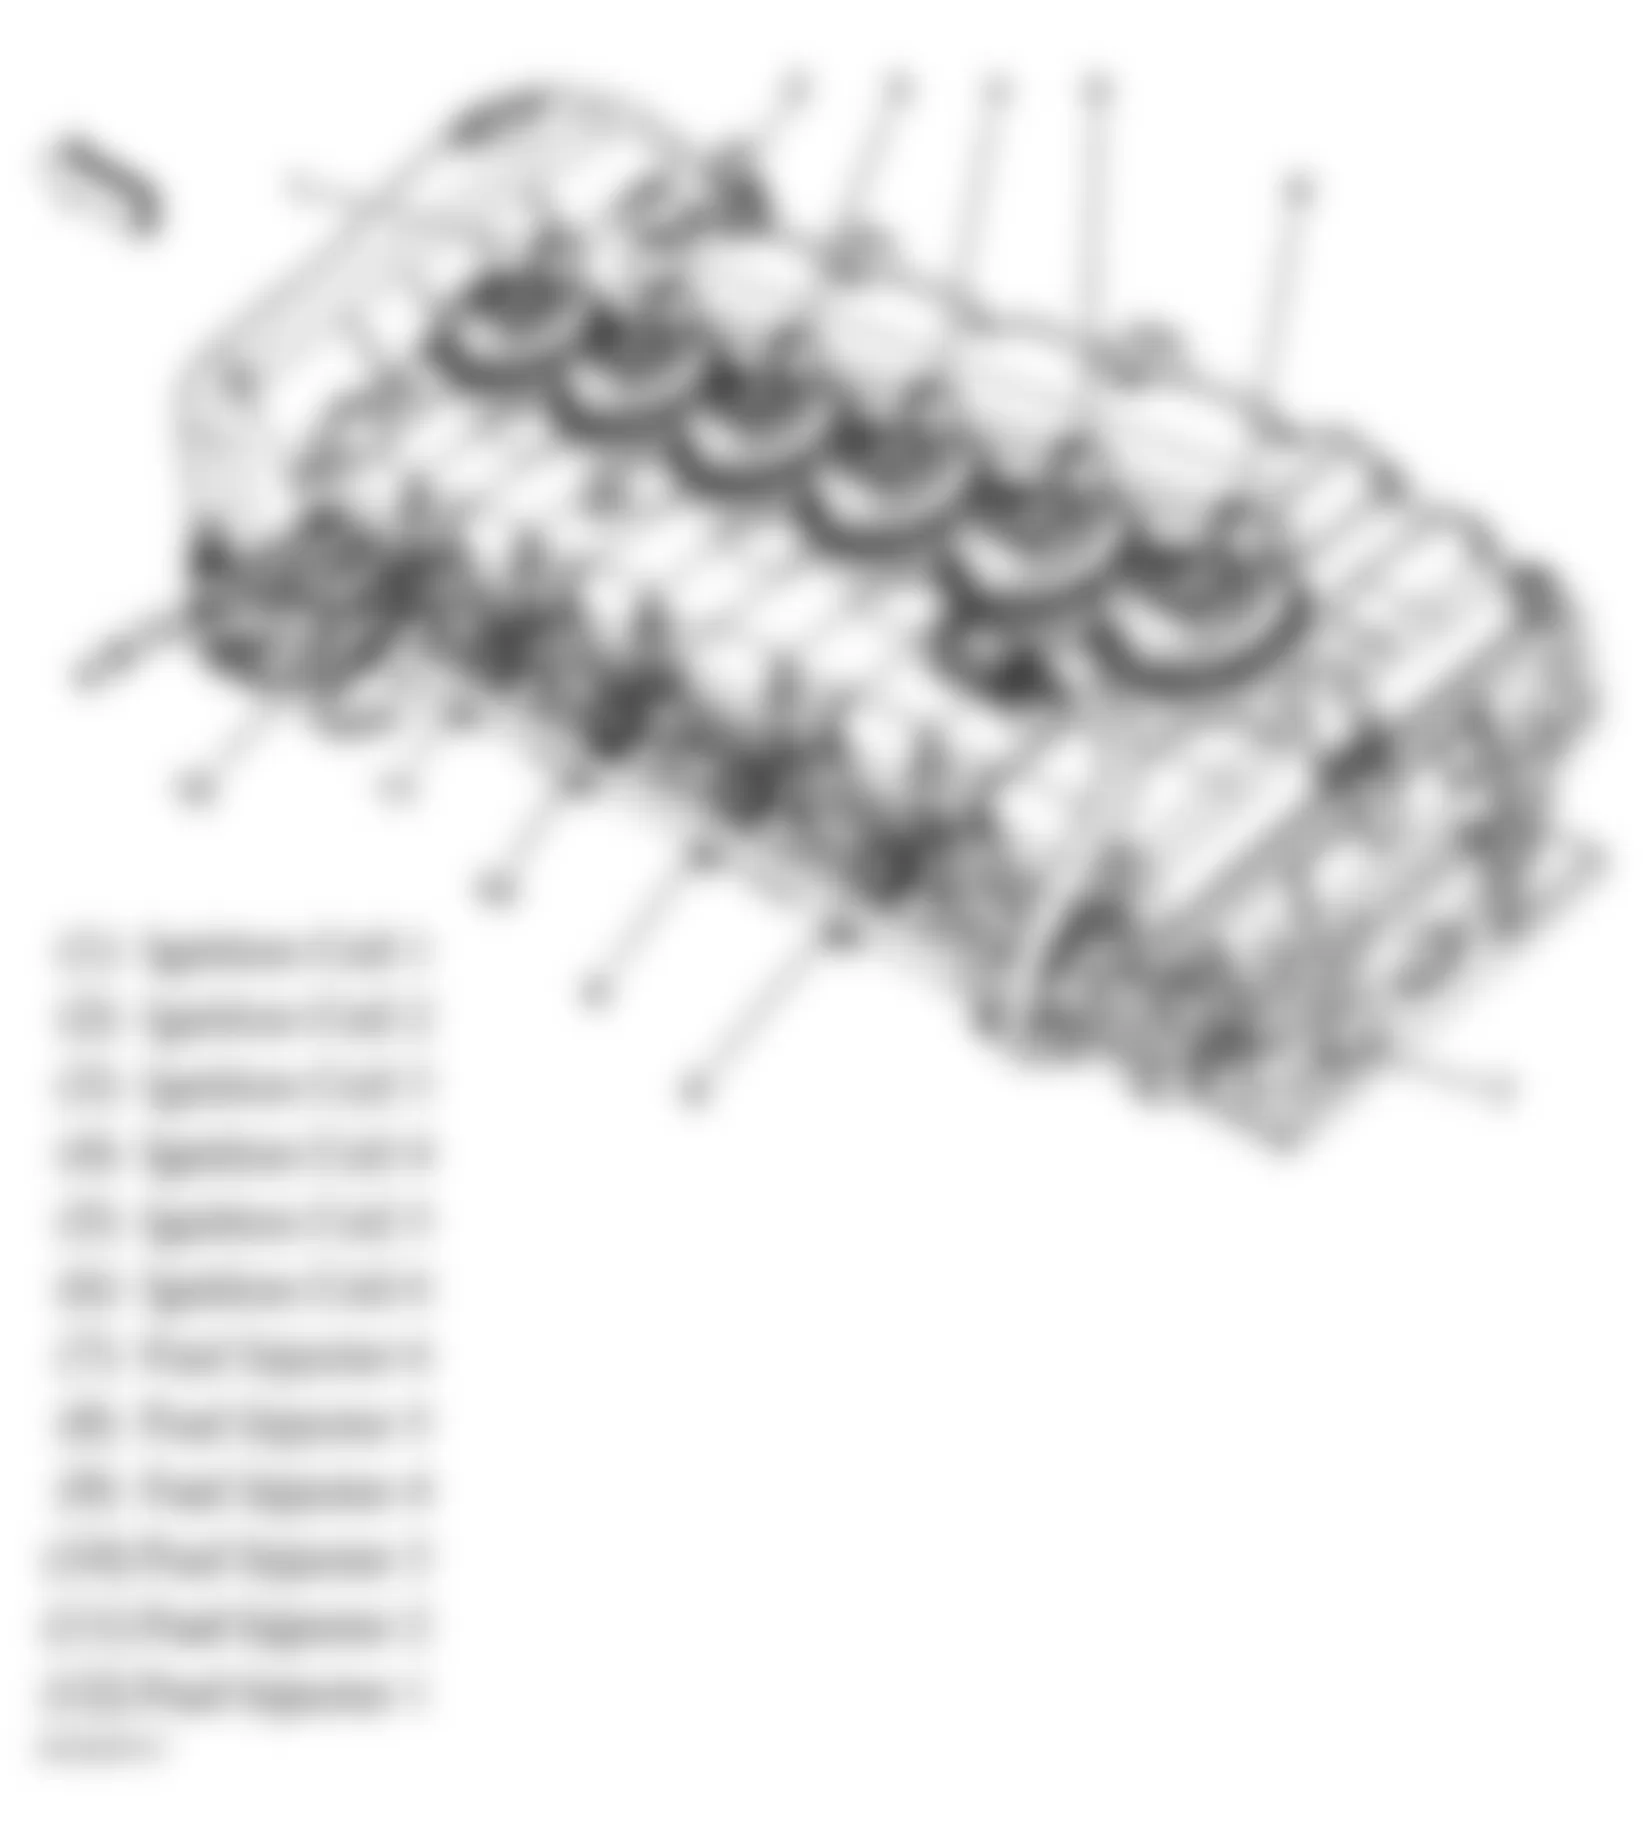 GMC Envoy 2007 - Component Locations -  Top Of Engine (4.2L)